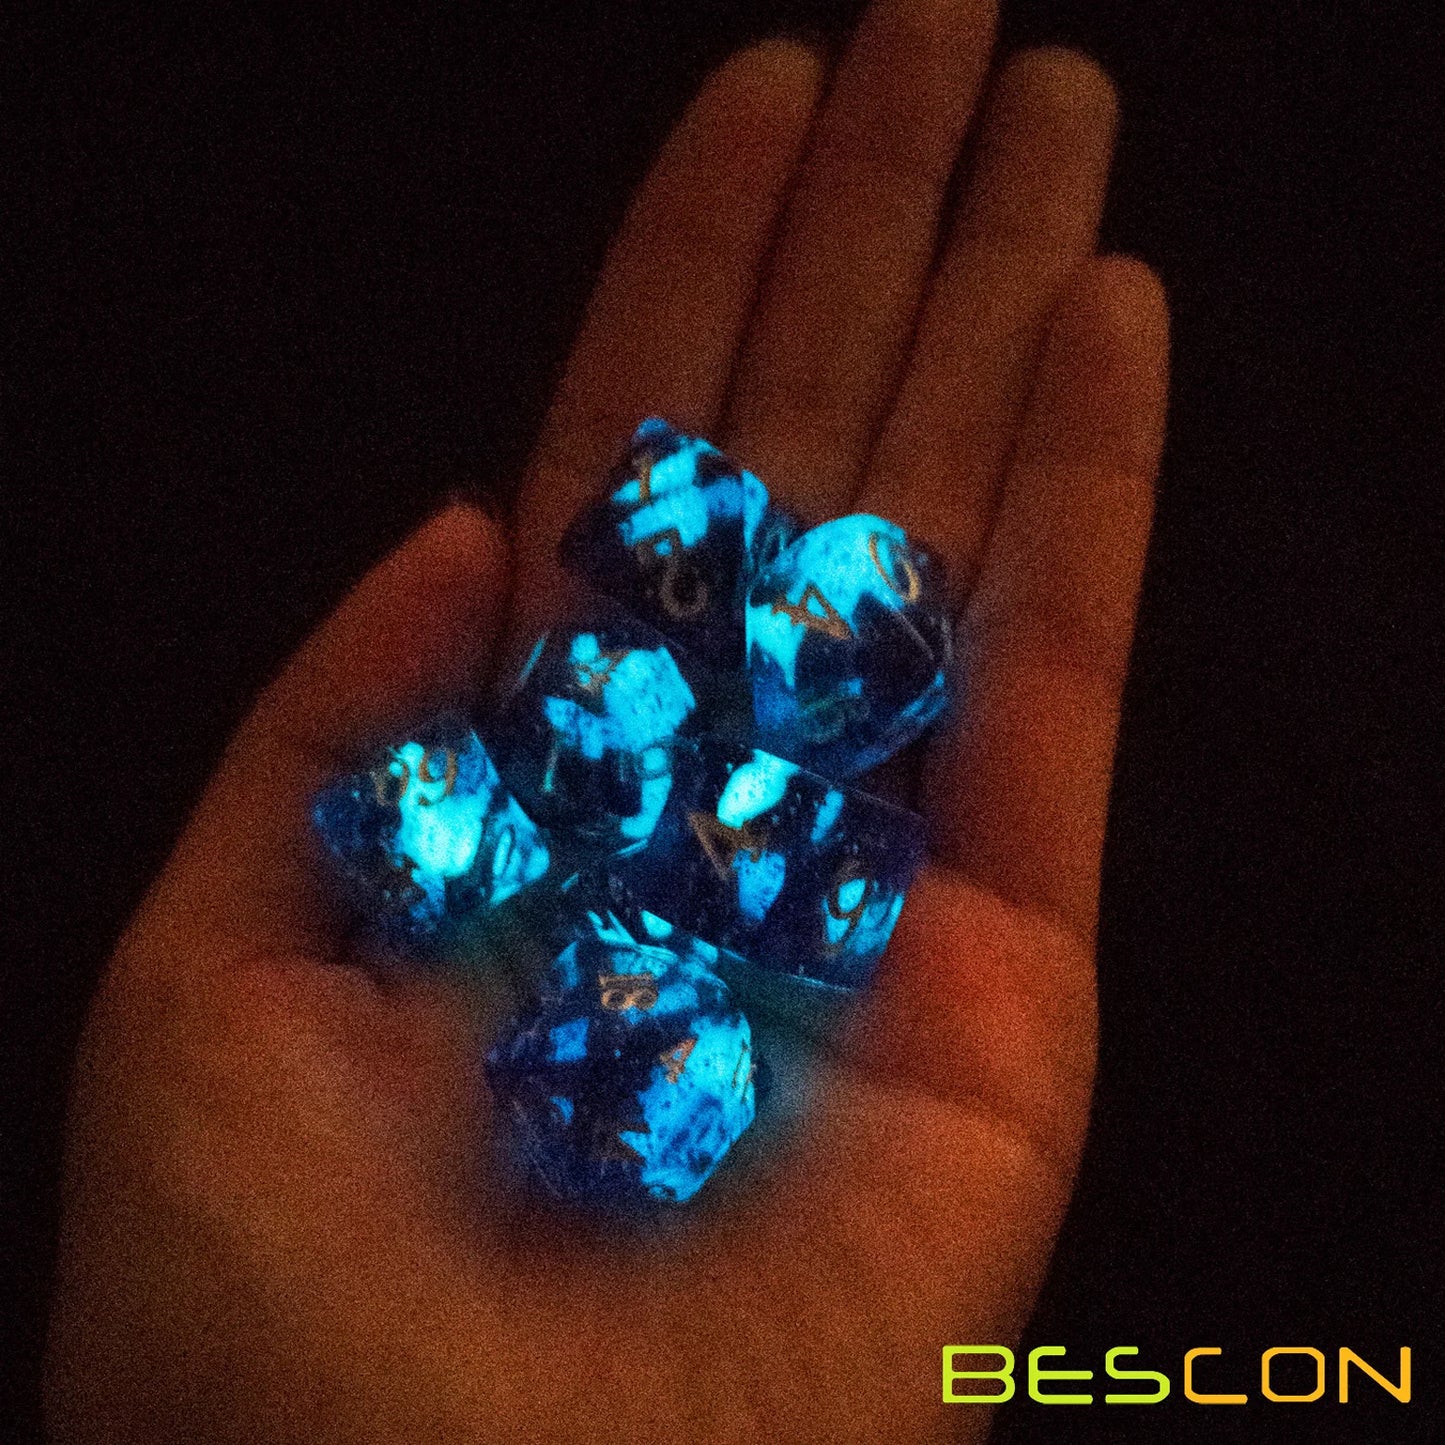 Bescon Super Glow in the Dark Glitter Polyhedral Dice Set DEEP SPACE, Luminous RPG Dice Set,Glowing Novelty DND Game Dice